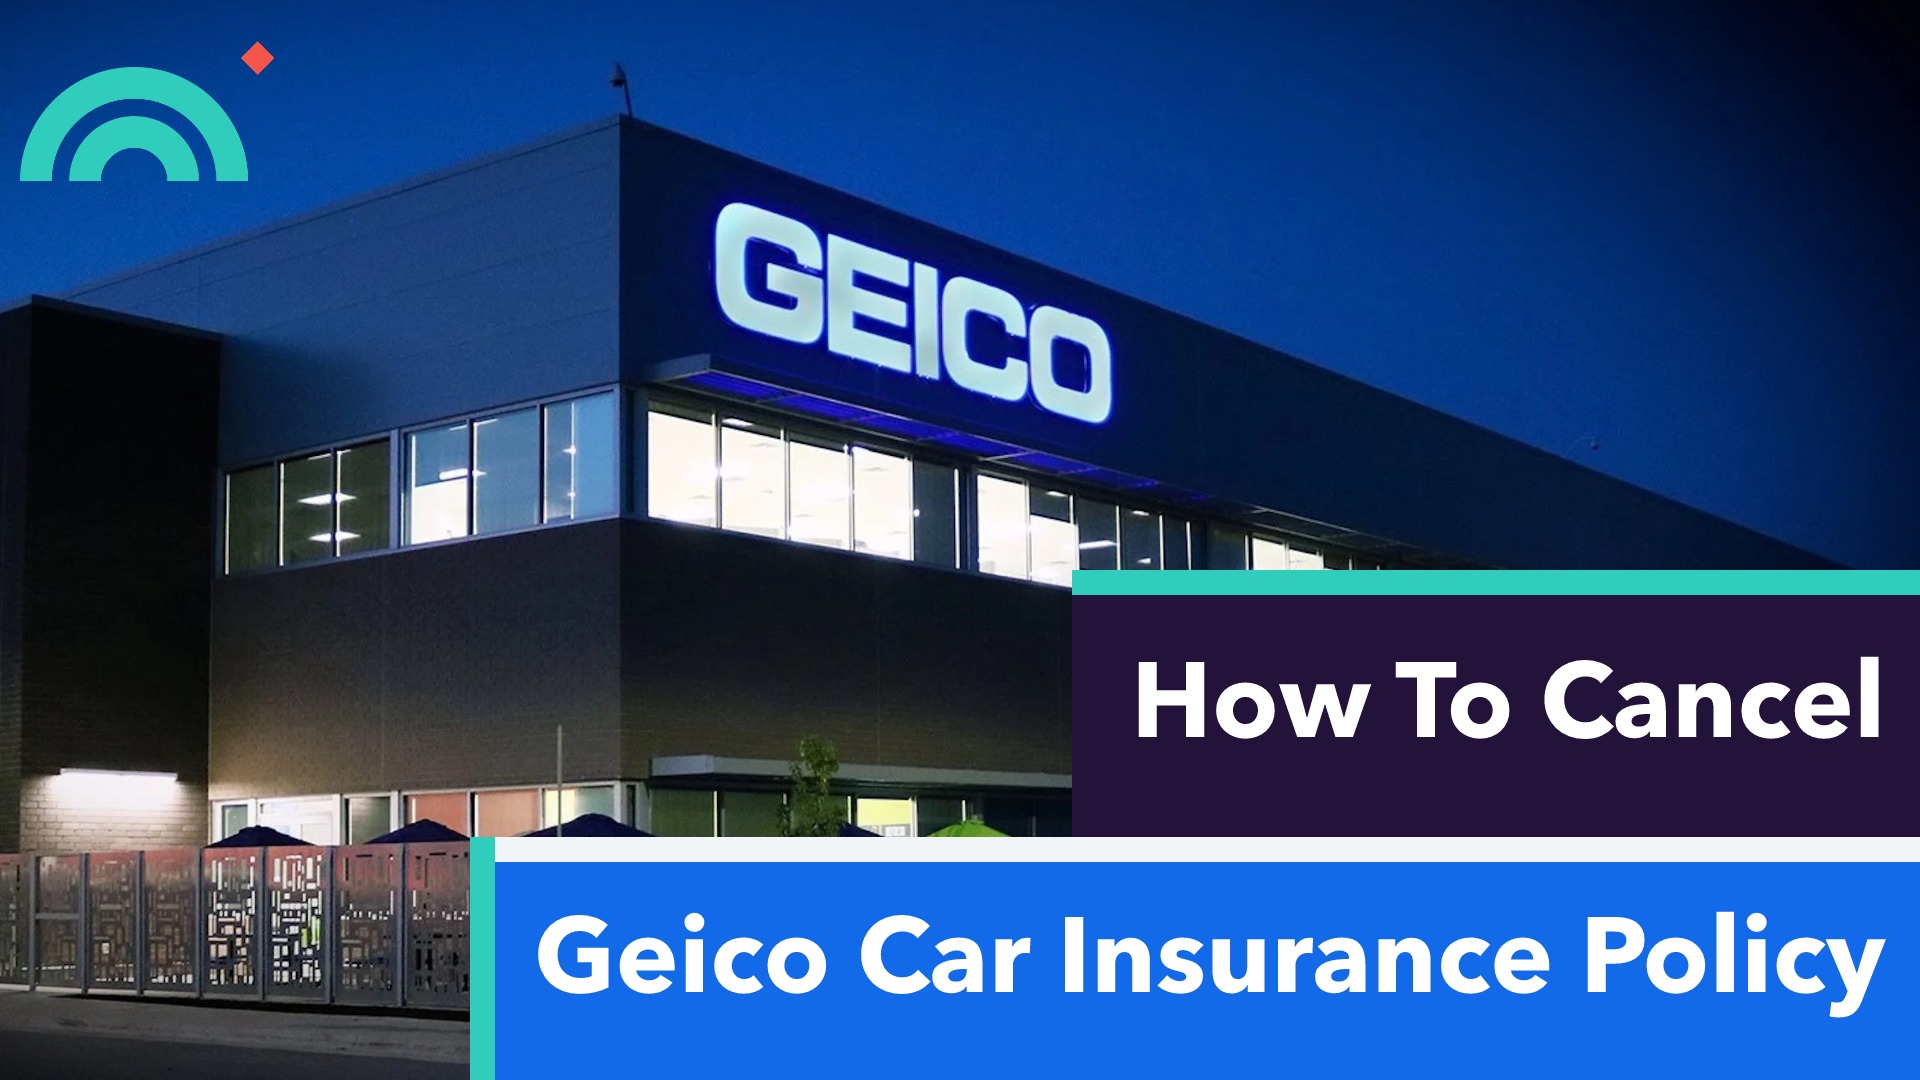 How To Cancel Geico Car Insurance Policy